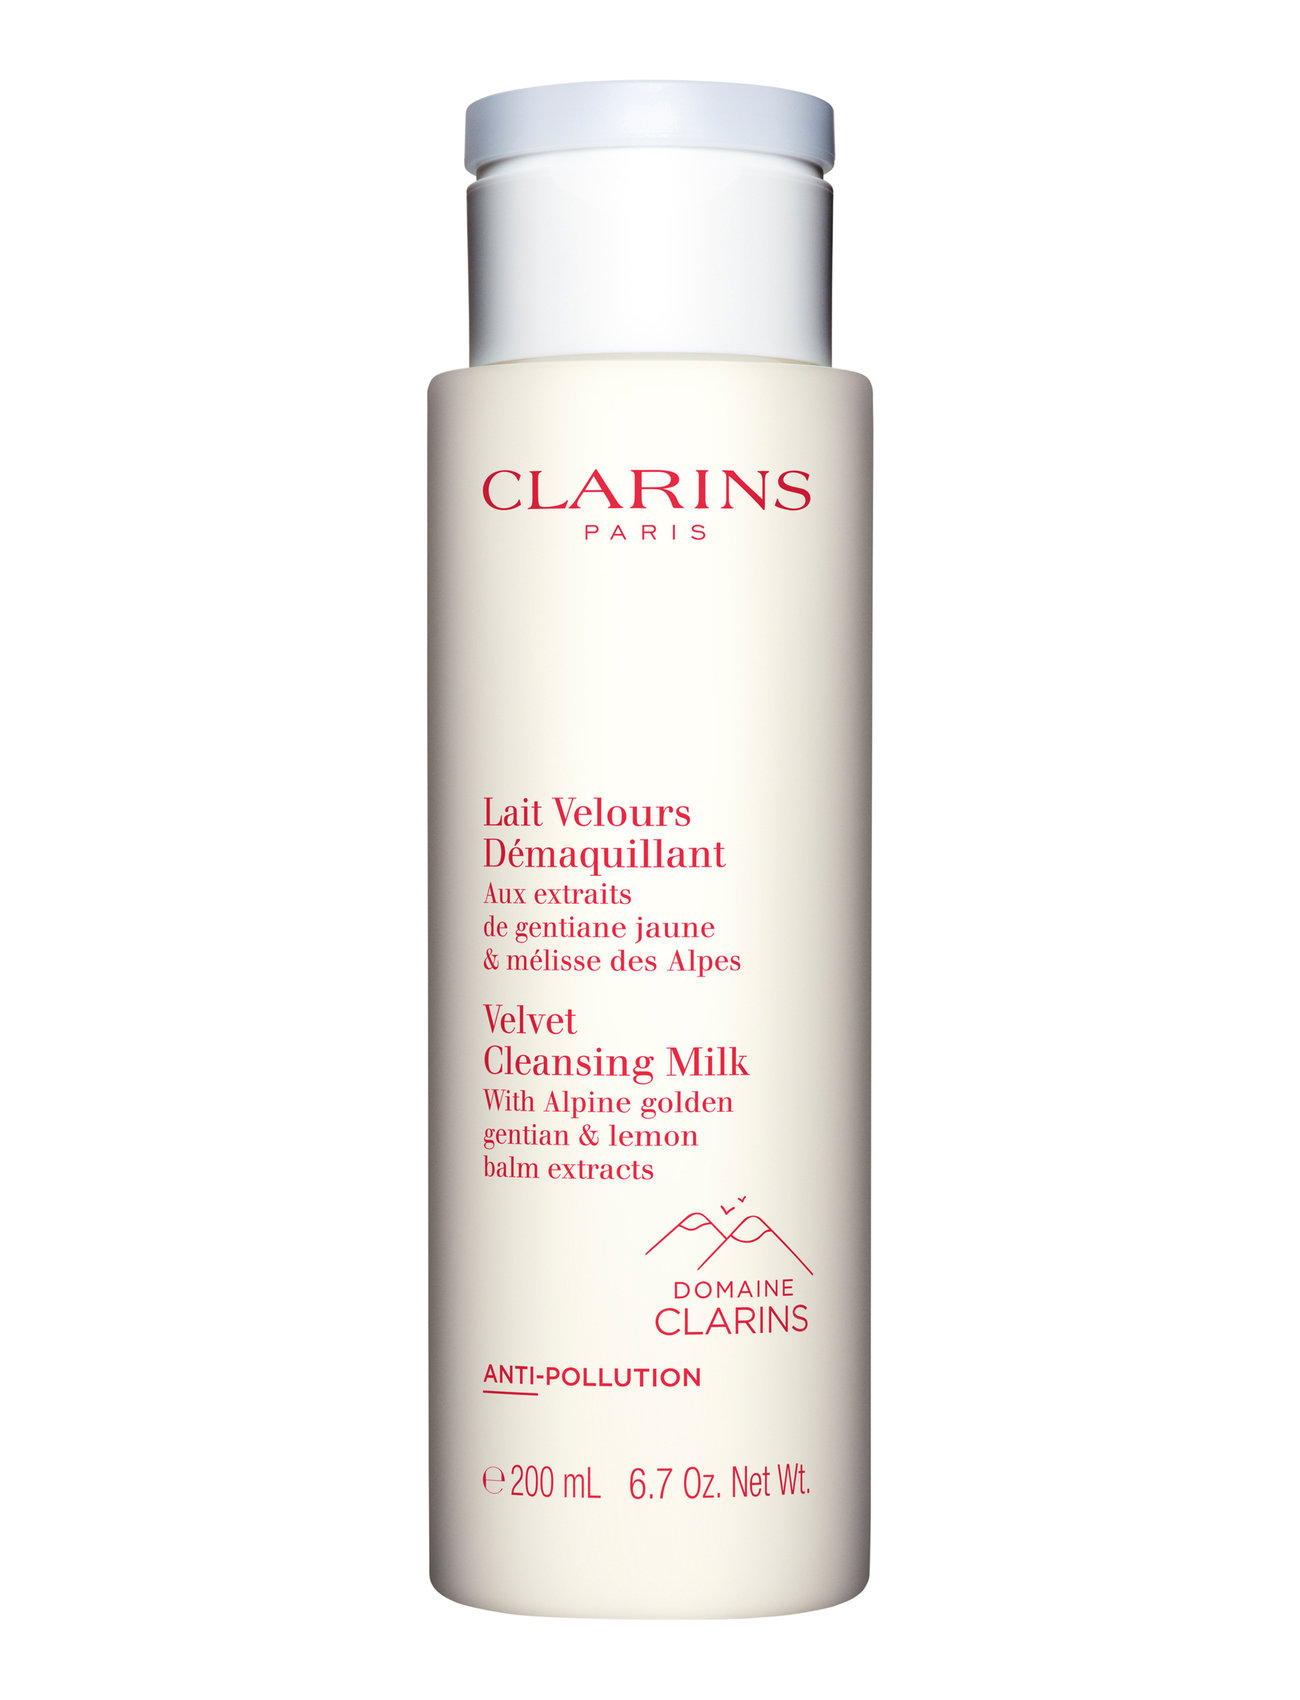 Velvet Cleansing Milk Beauty WOMEN Skin Care Face Cleansers Milk Cleanser Nude Clarins